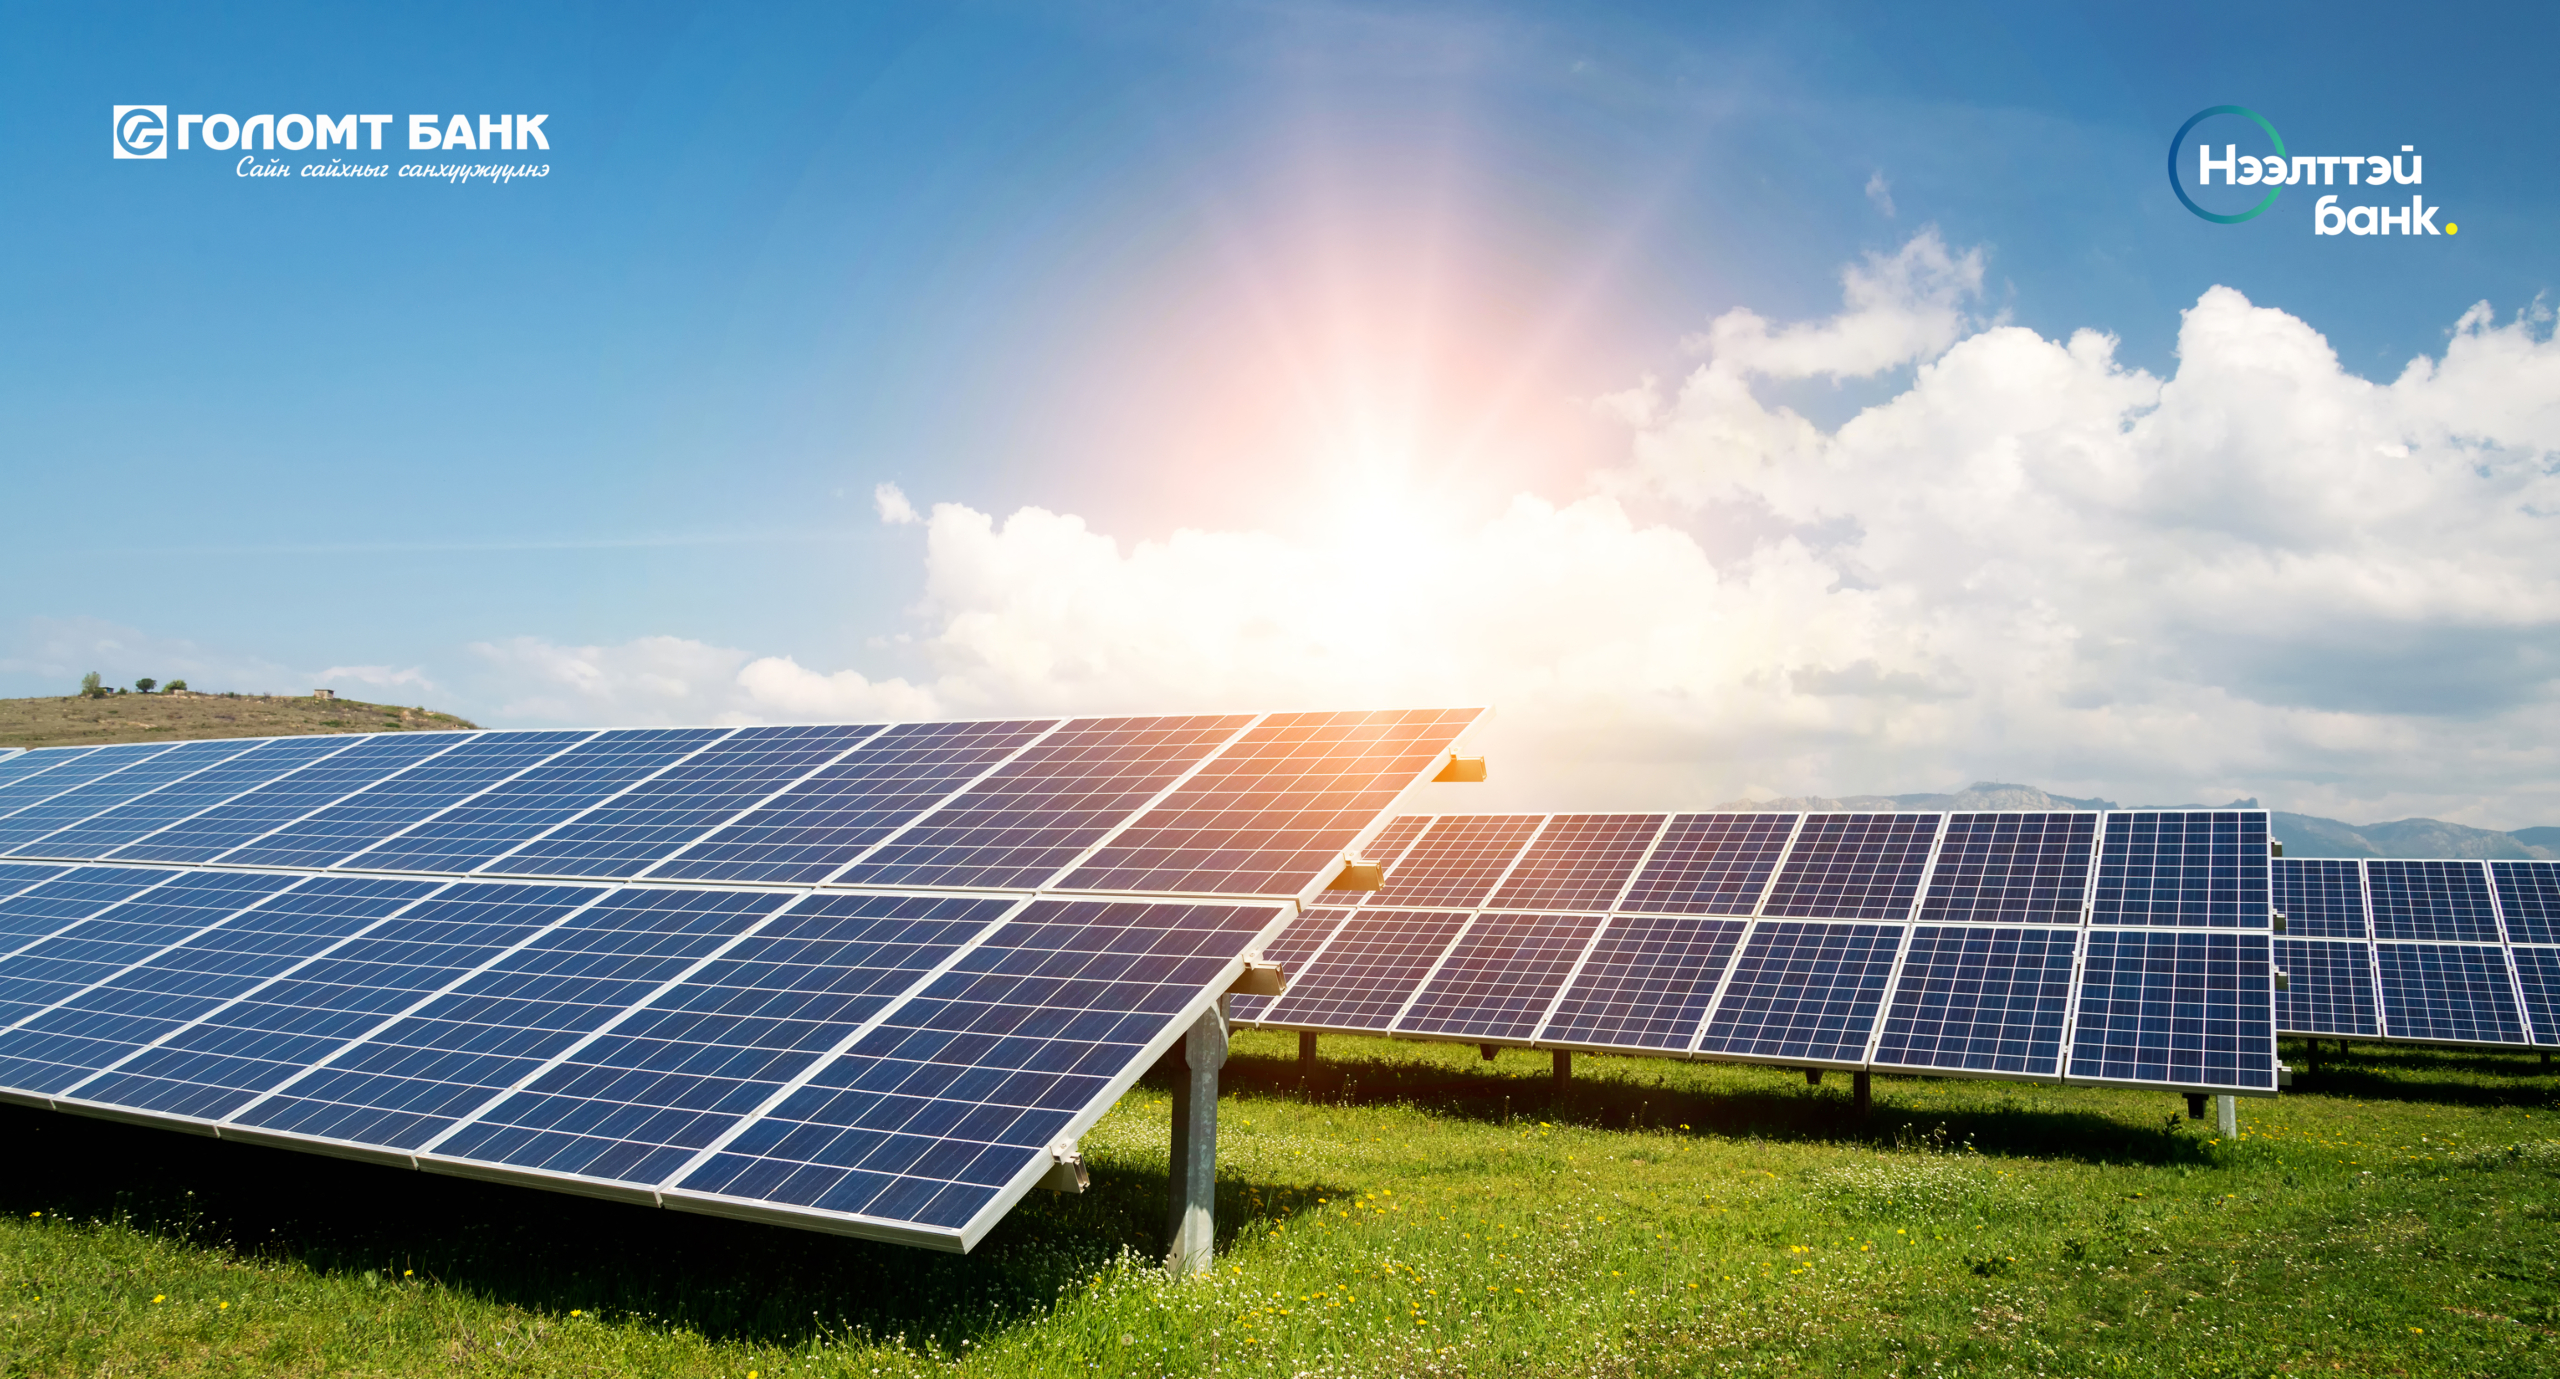 Golomt Bank has issued “Green Guarantee” for the Engineering, Procurement and Construction (EPC) contract for Moron solar PV in Mongolia